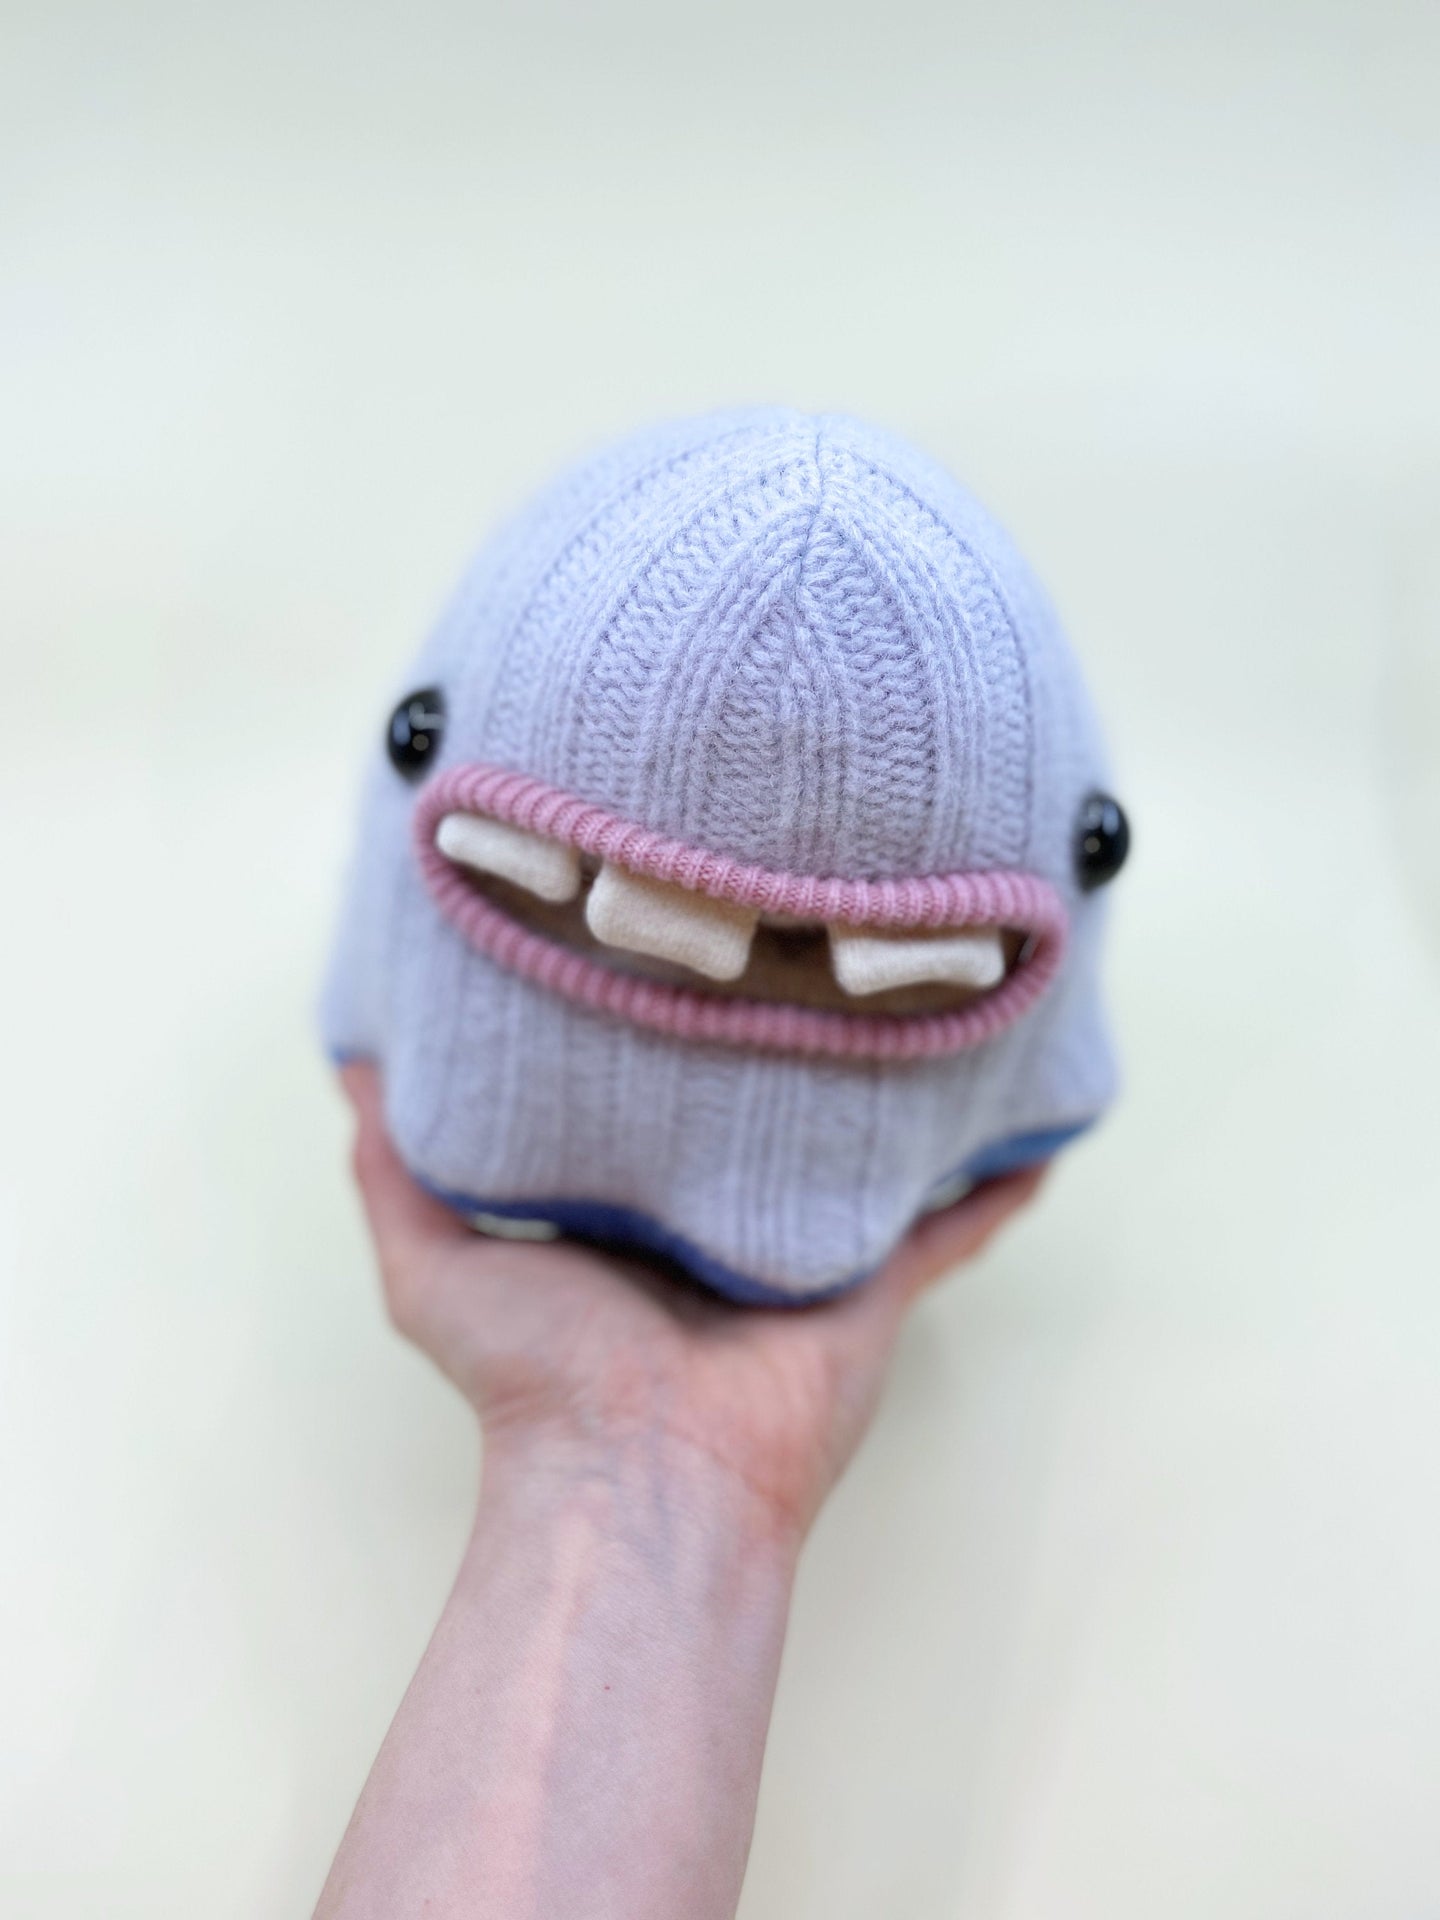 cute sweater monster with three teeth and pocket mouth